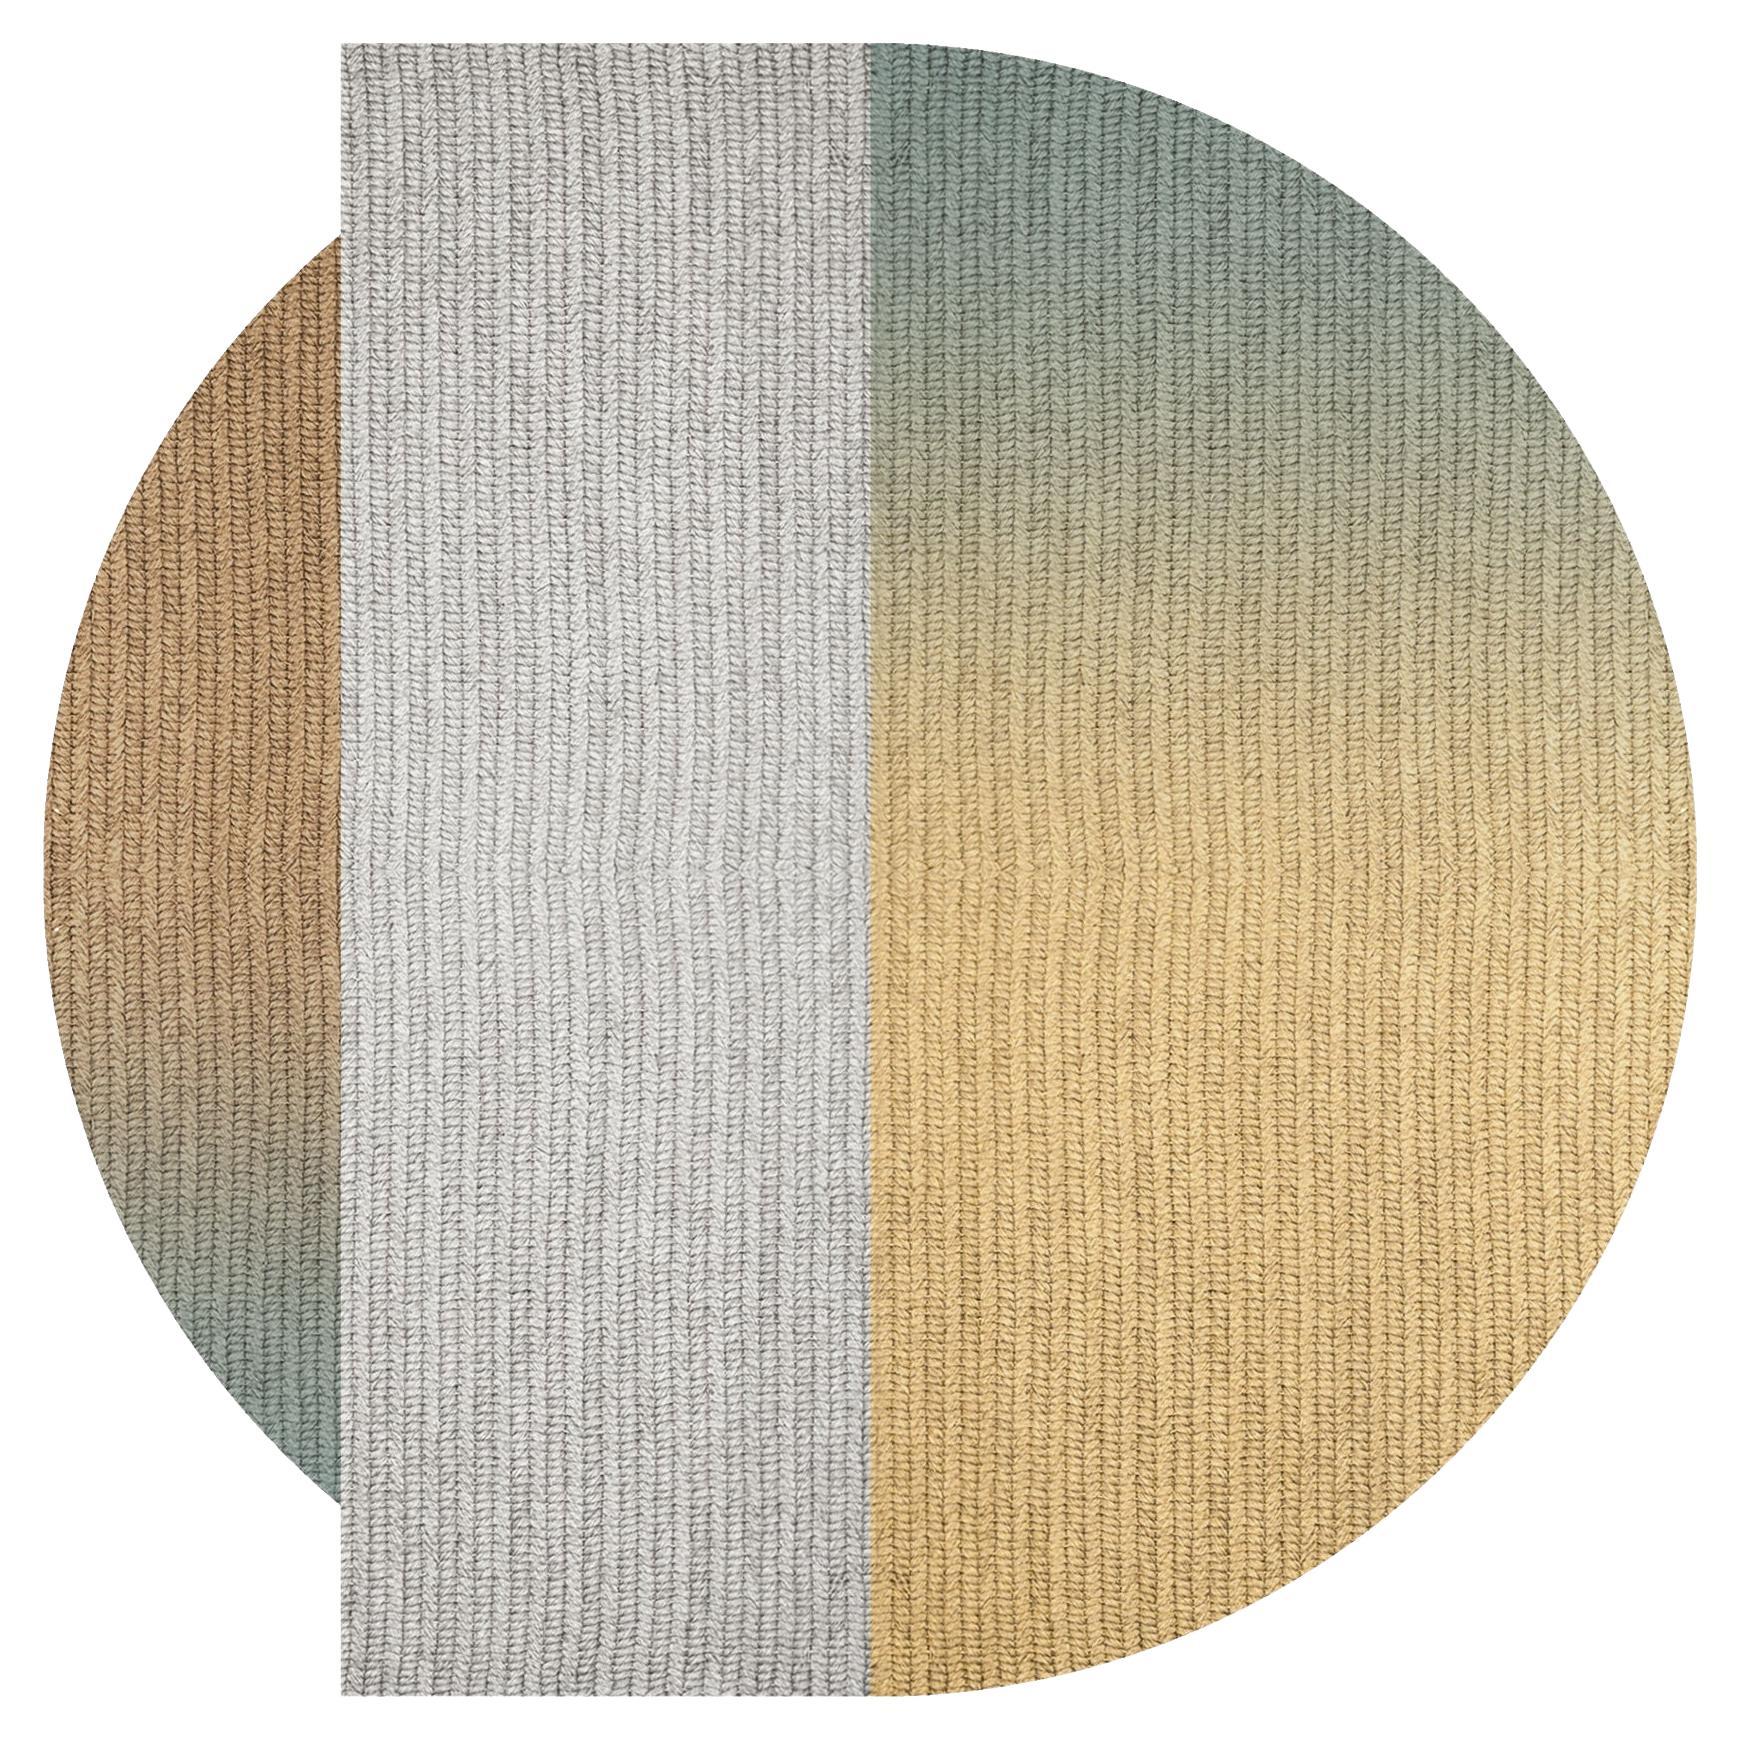 'Flux' Rug in Abaca, Colour 'Sterling', Ø 200cm by Claire Vos for Musett Design For Sale